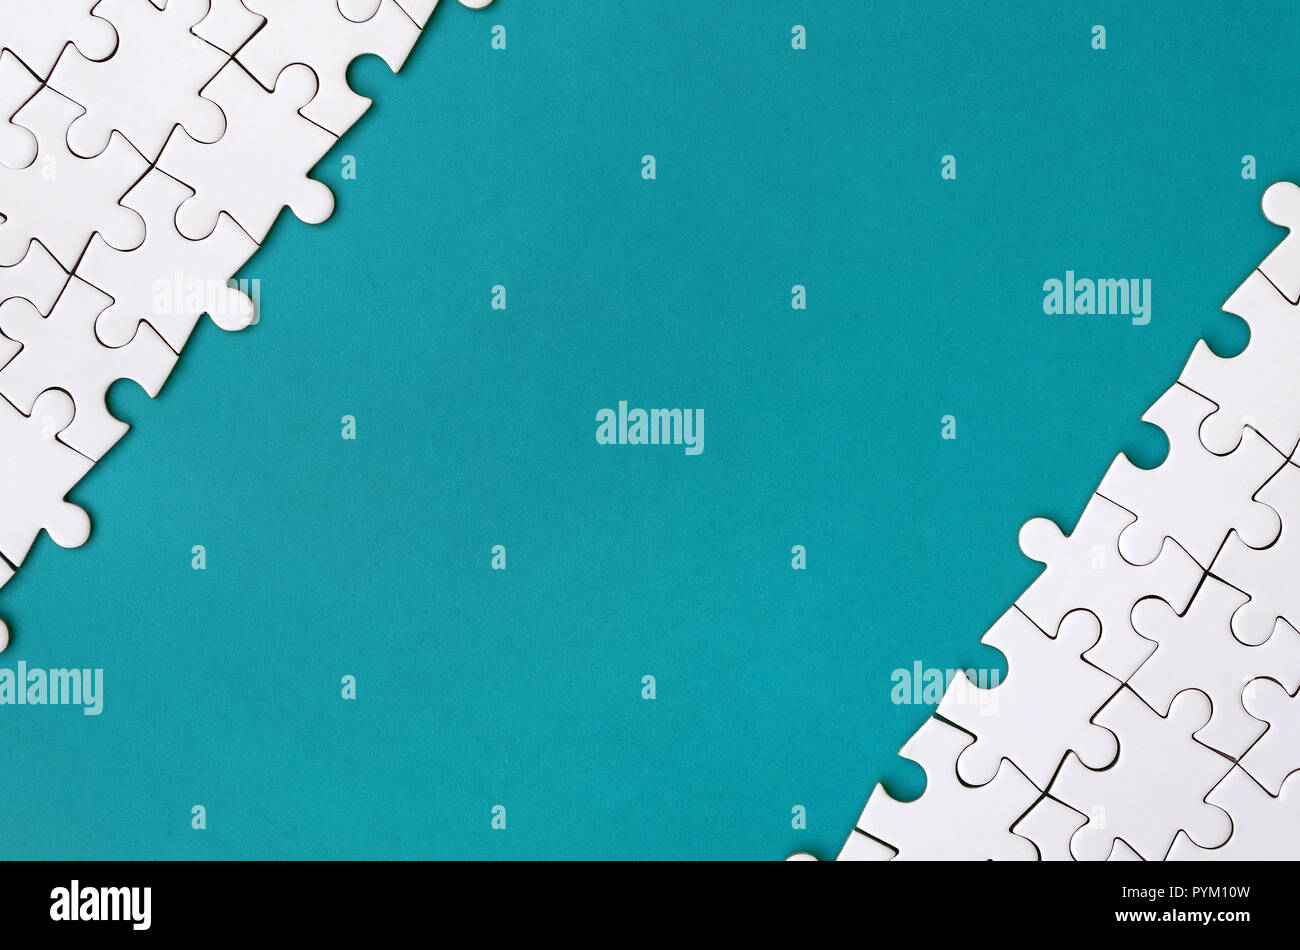 https://c8.alamy.com/comp/PYM10W/fragment-of-a-folded-white-jigsaw-puzzle-on-the-background-of-a-blue-plastic-surface-texture-photo-with-copy-space-for-text-PYM10W.jpg